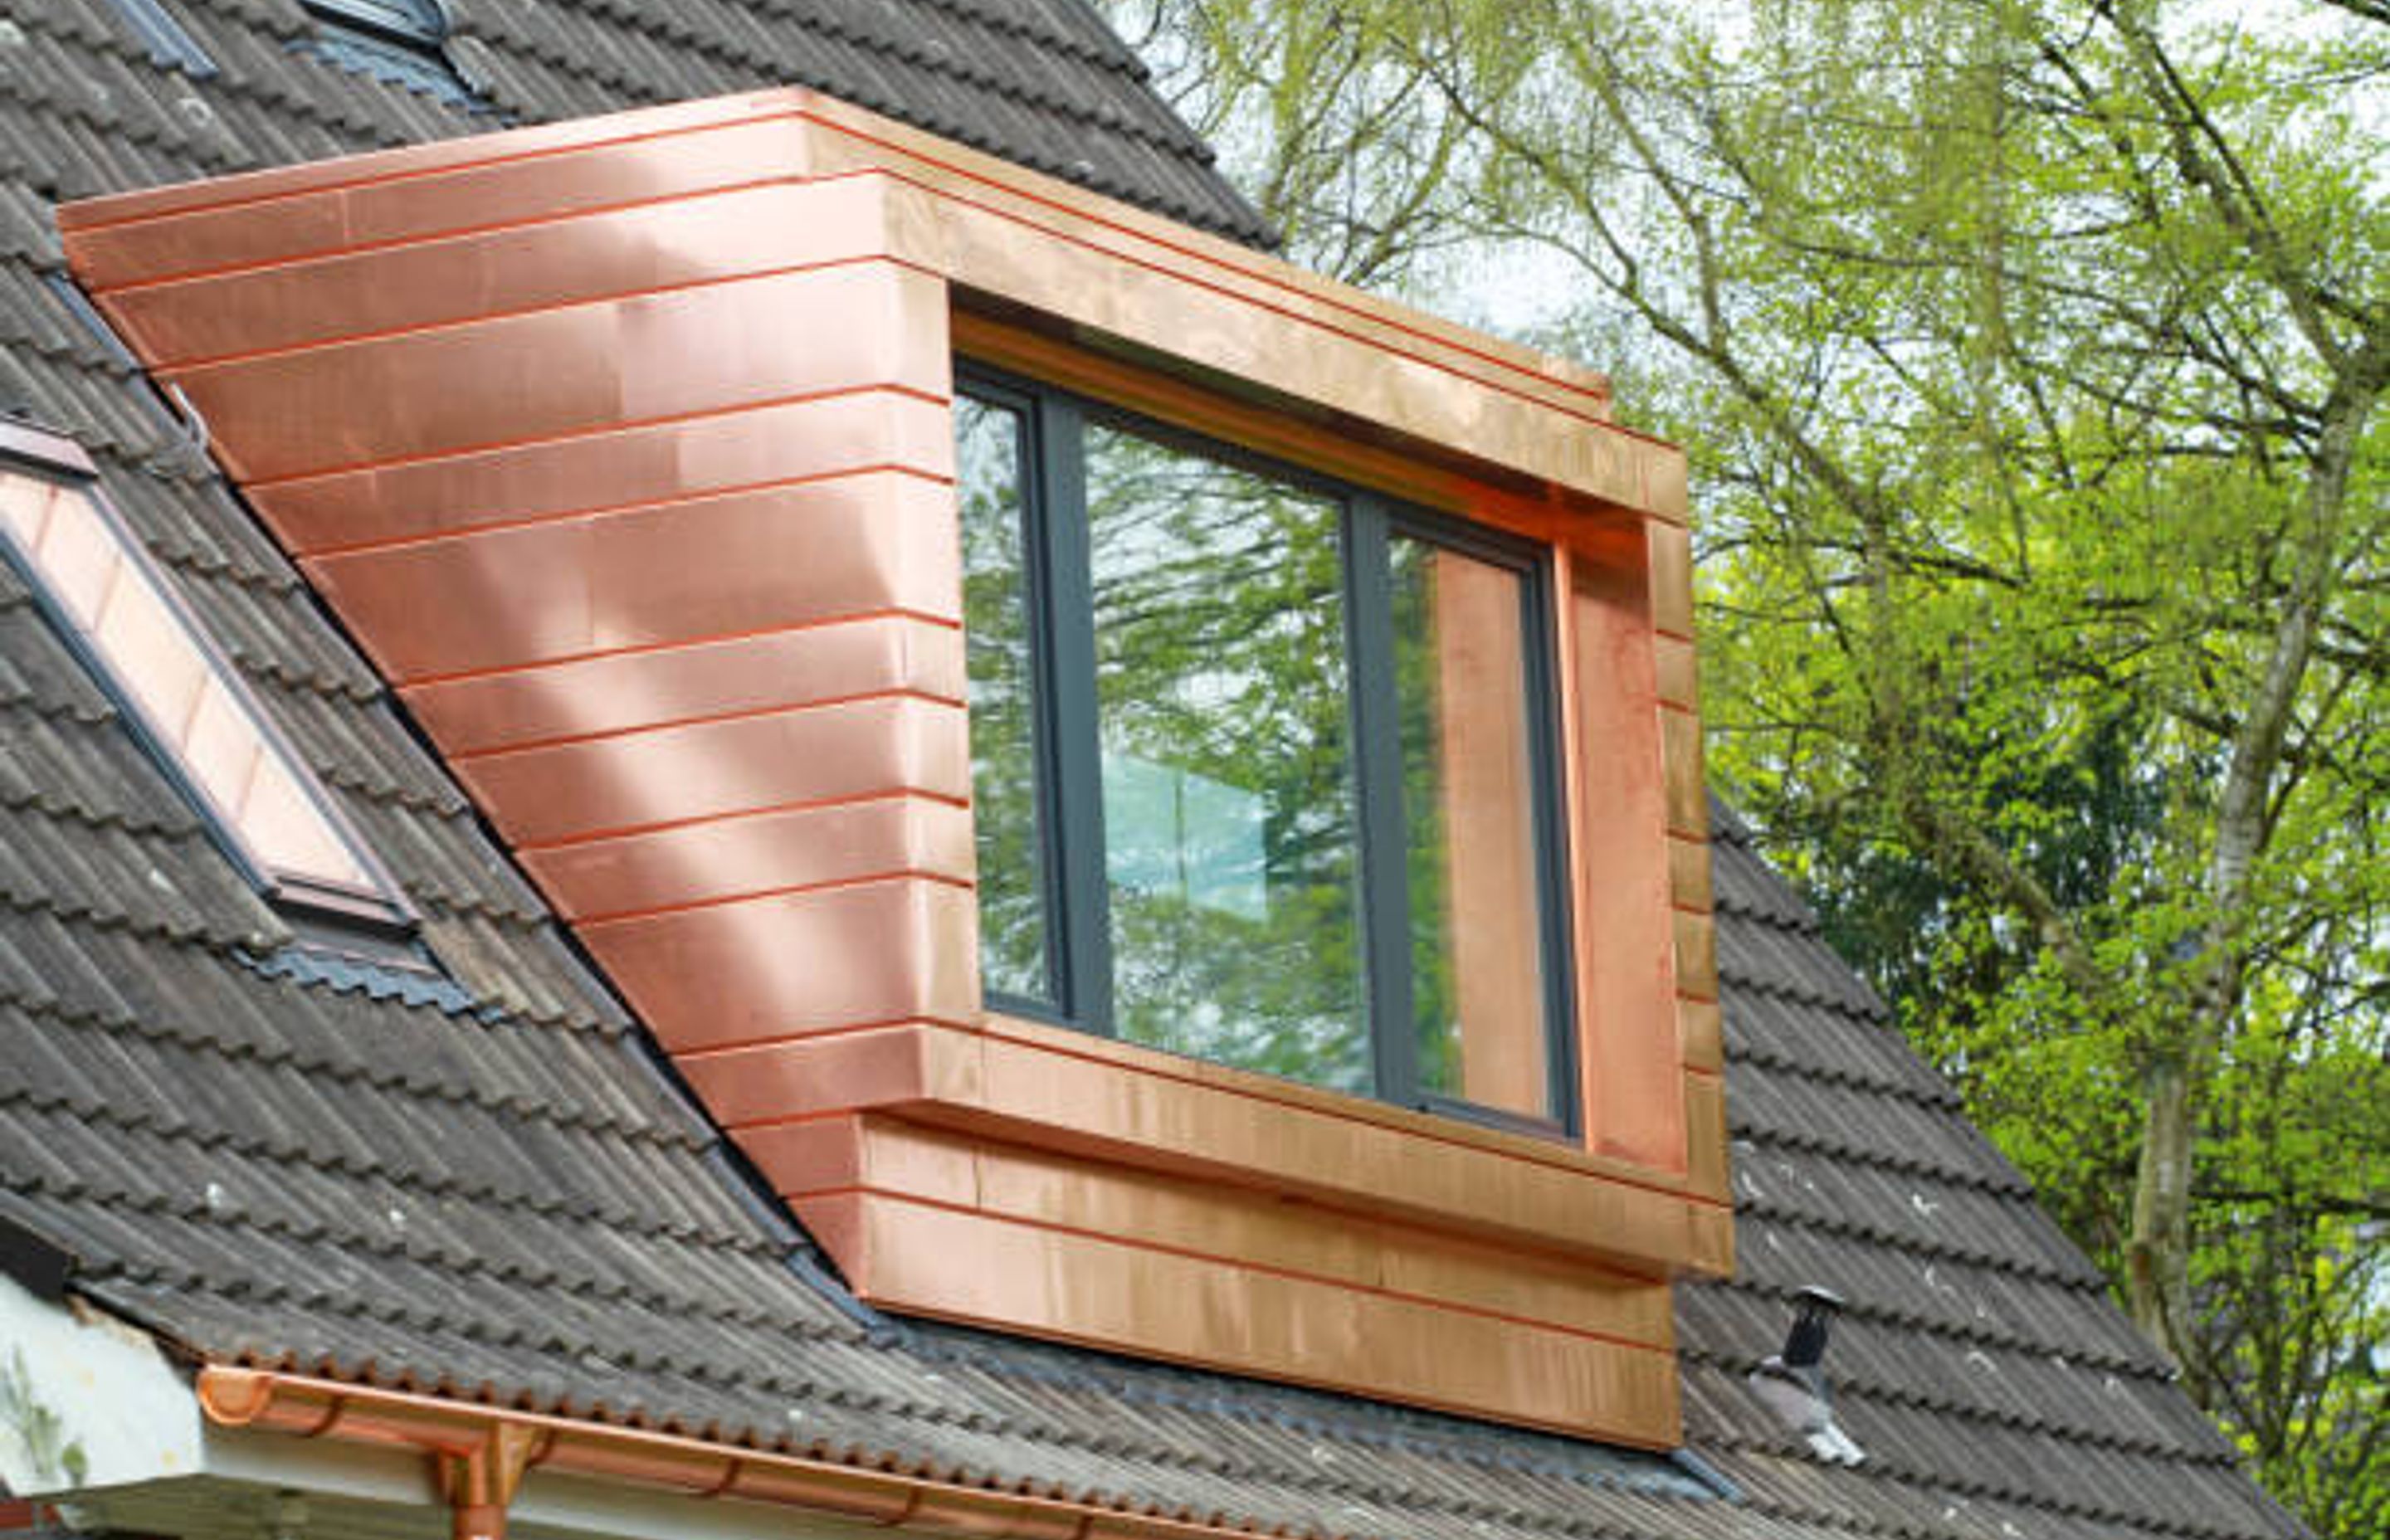 Copper Tiles on a part of the house | Photo Credit – iStock